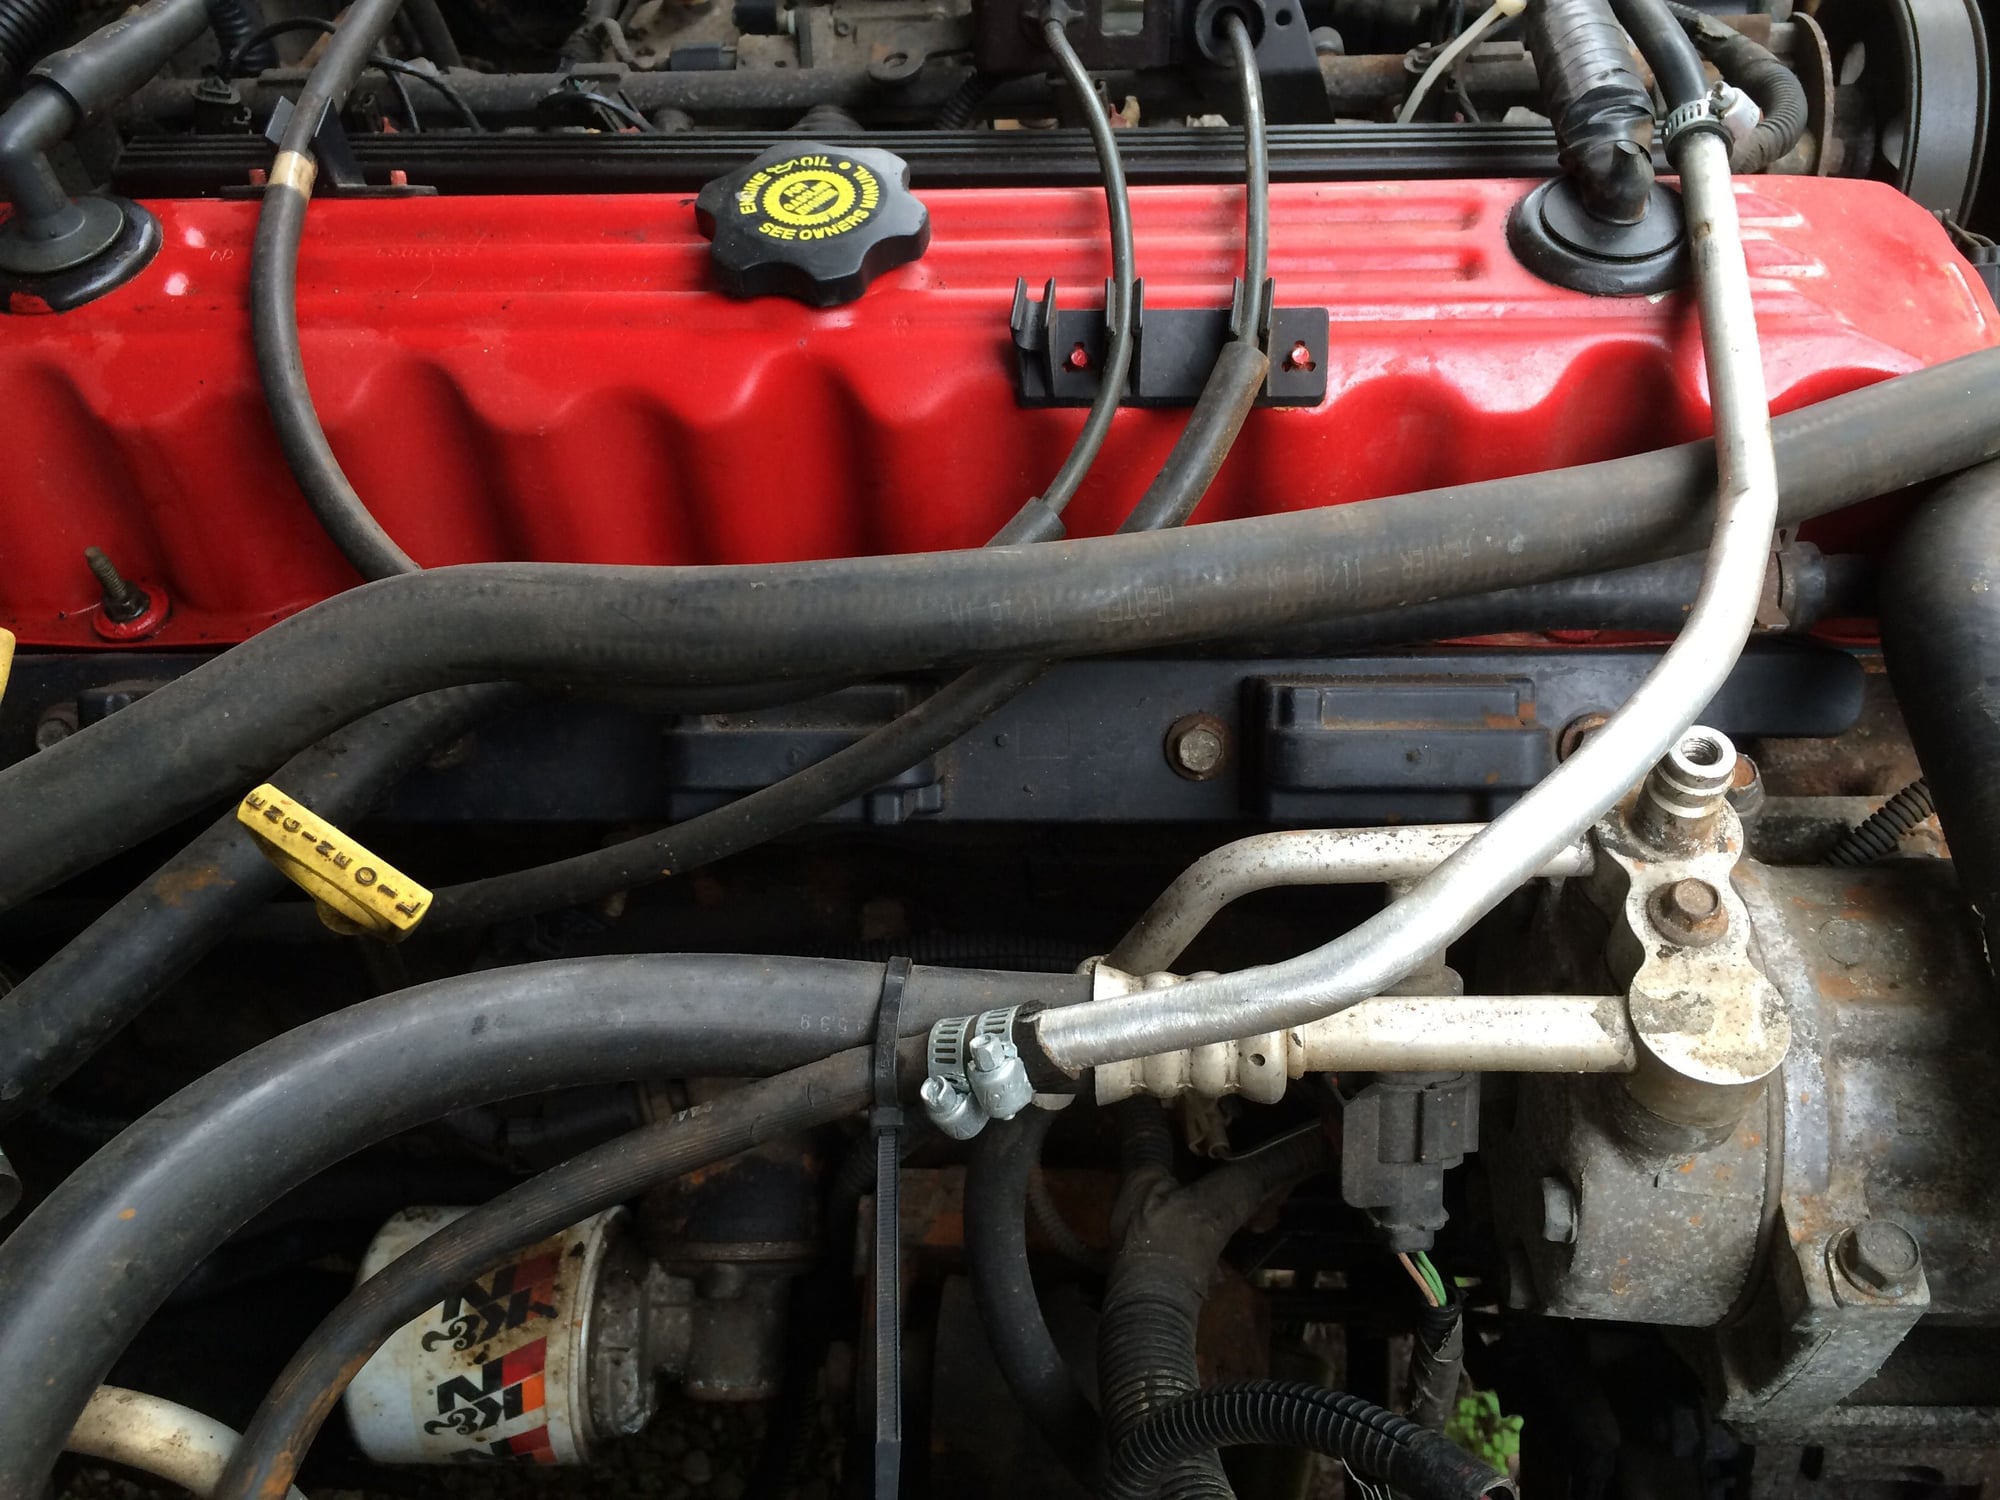 Troubleshooting Dodge Code P1391: Unraveling Engine Misfire Issues